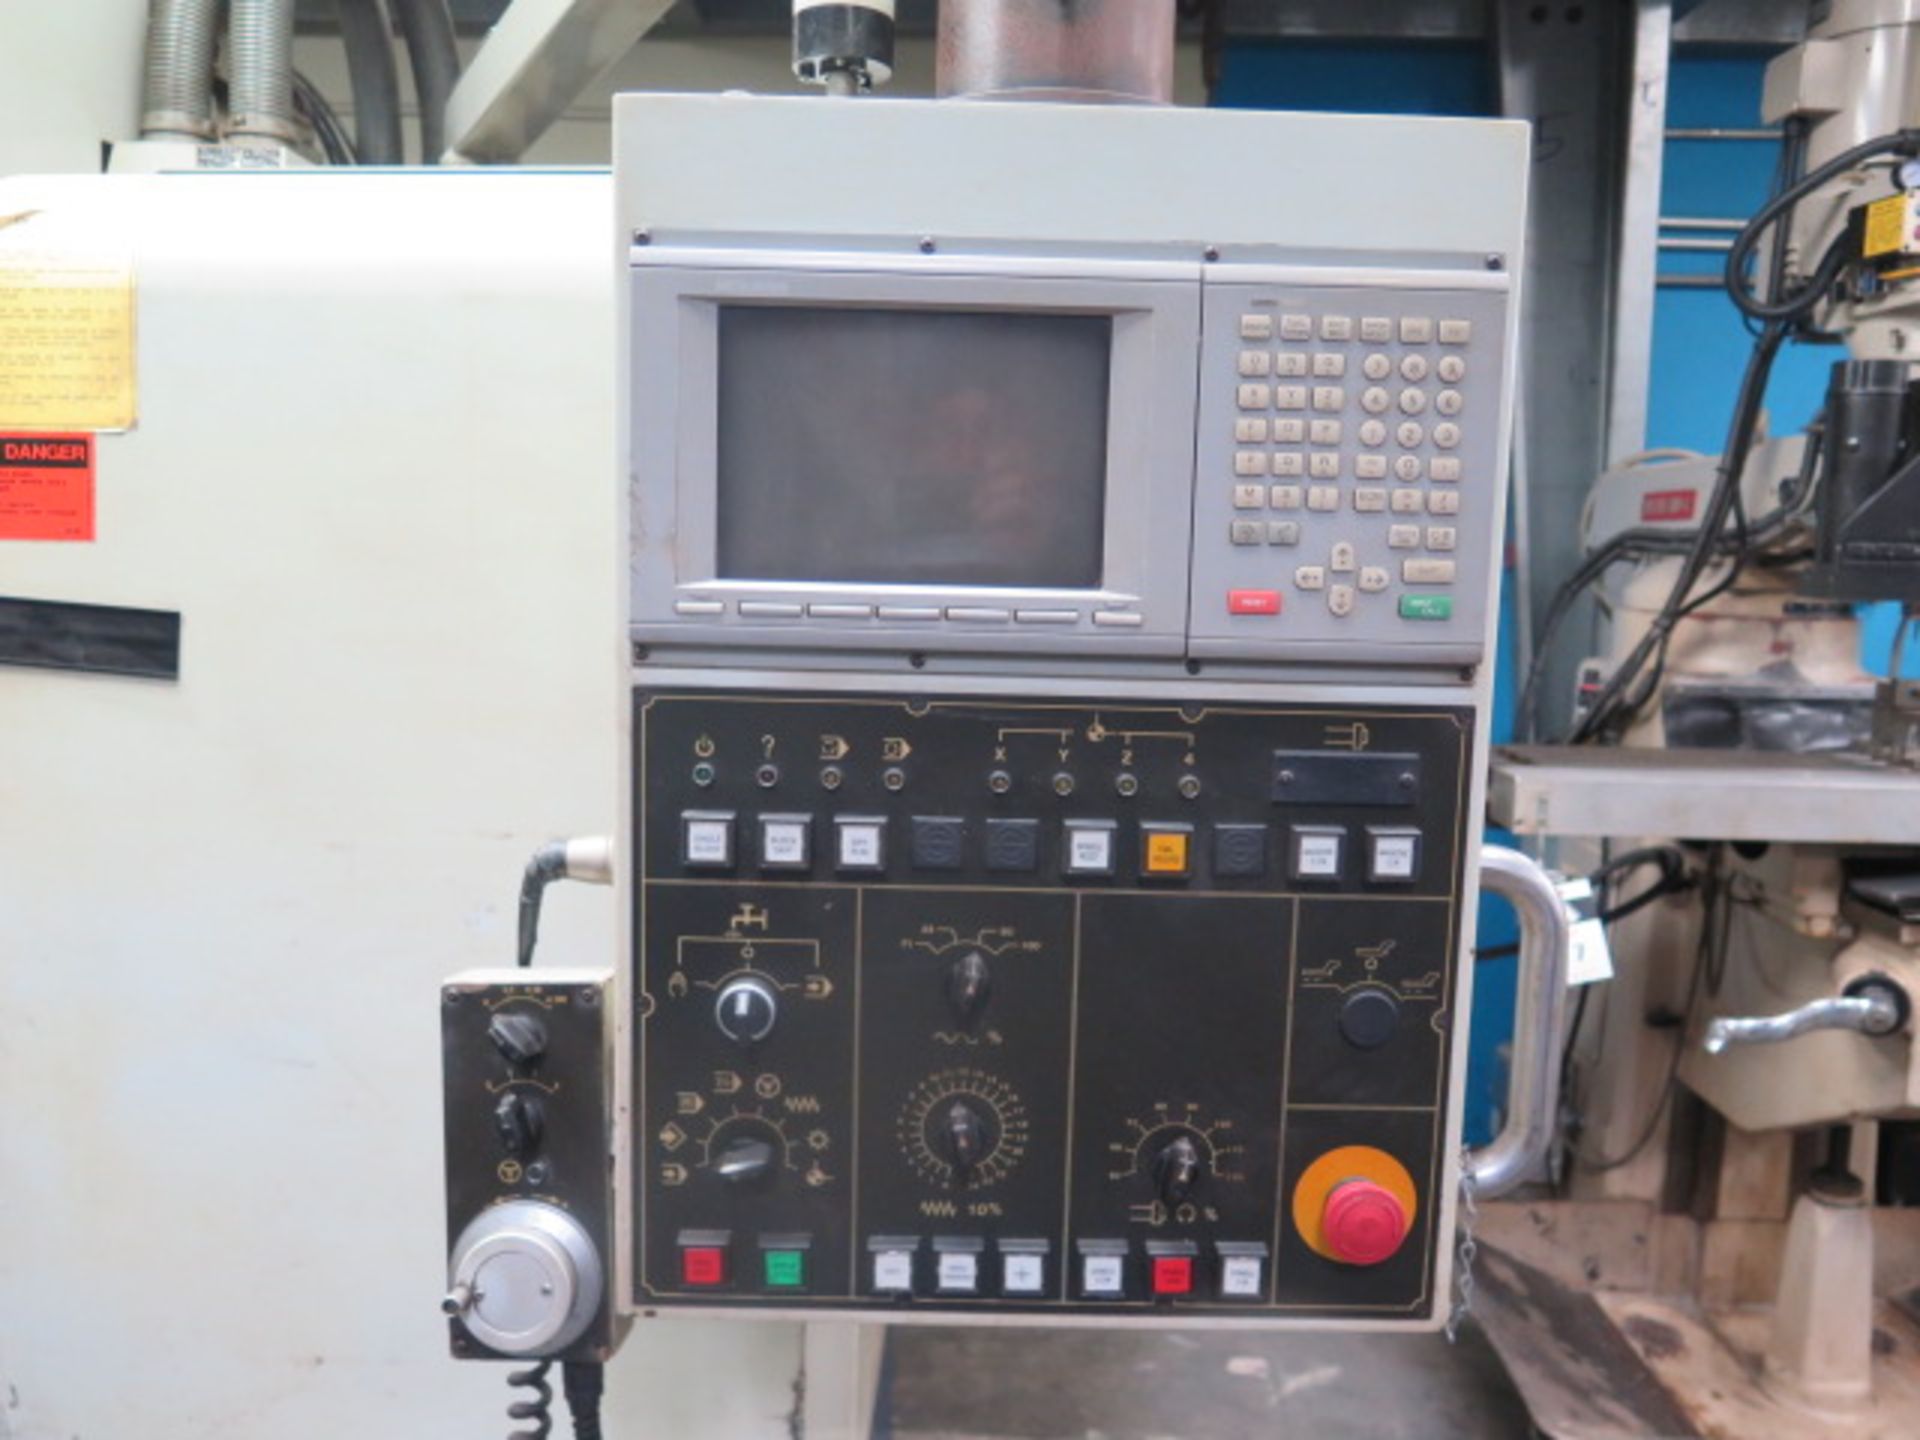 Acra FVMC-810 CNC VMC s/n V3013 w/ Mitsubishi Controls, 16-Station ATC, SOLD AS IS - Image 9 of 12